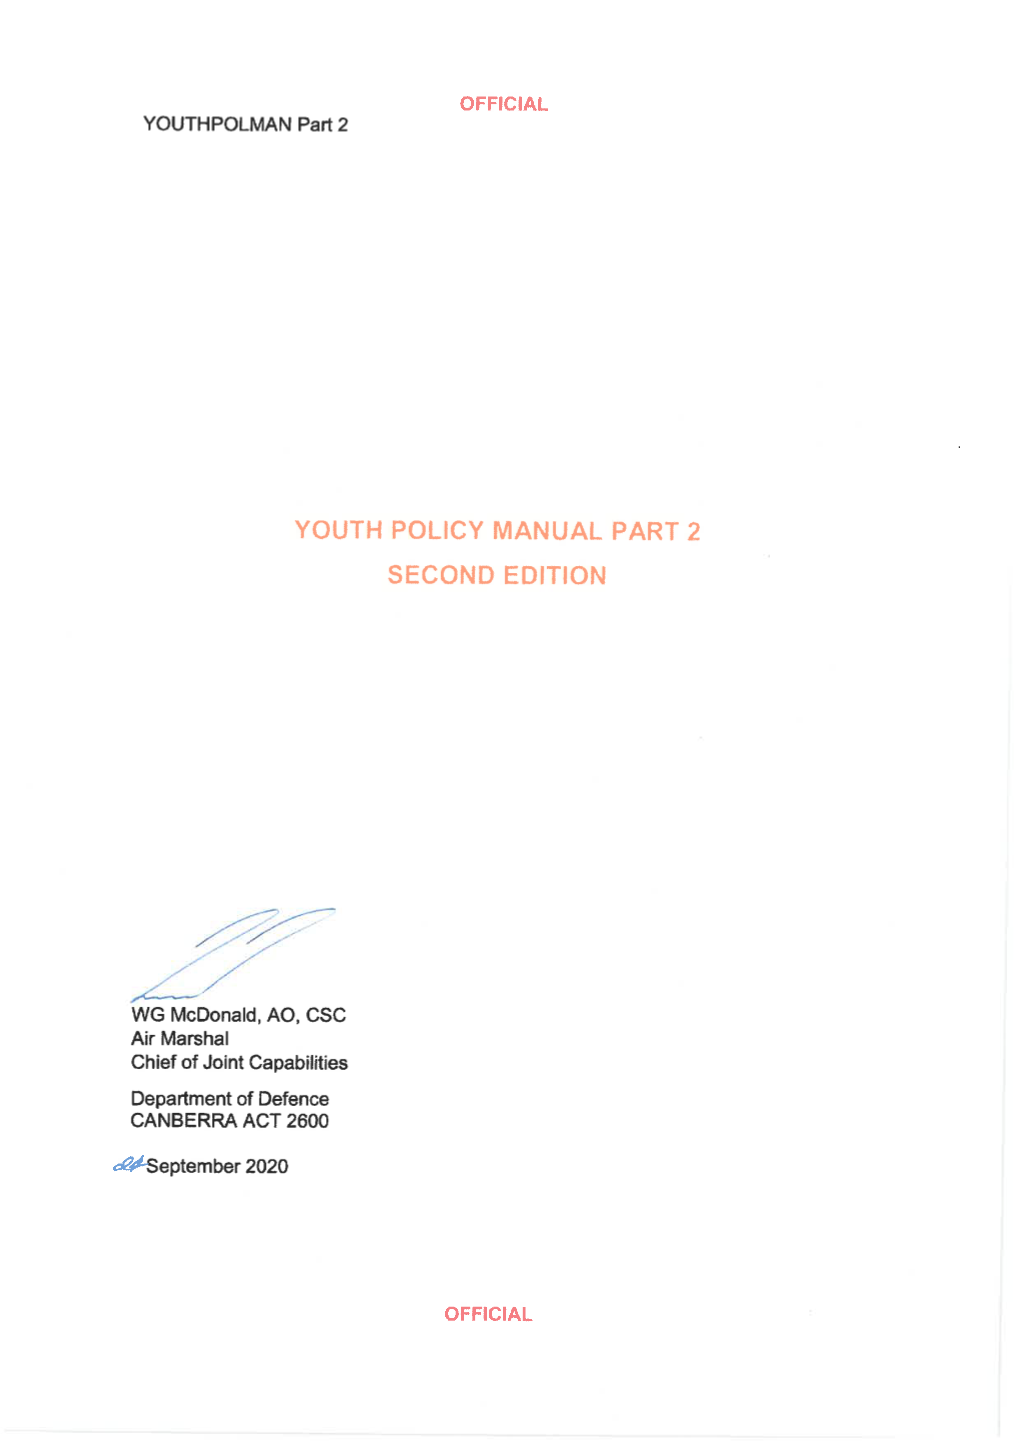 Youth Policy Manual Part 2 Second Edition